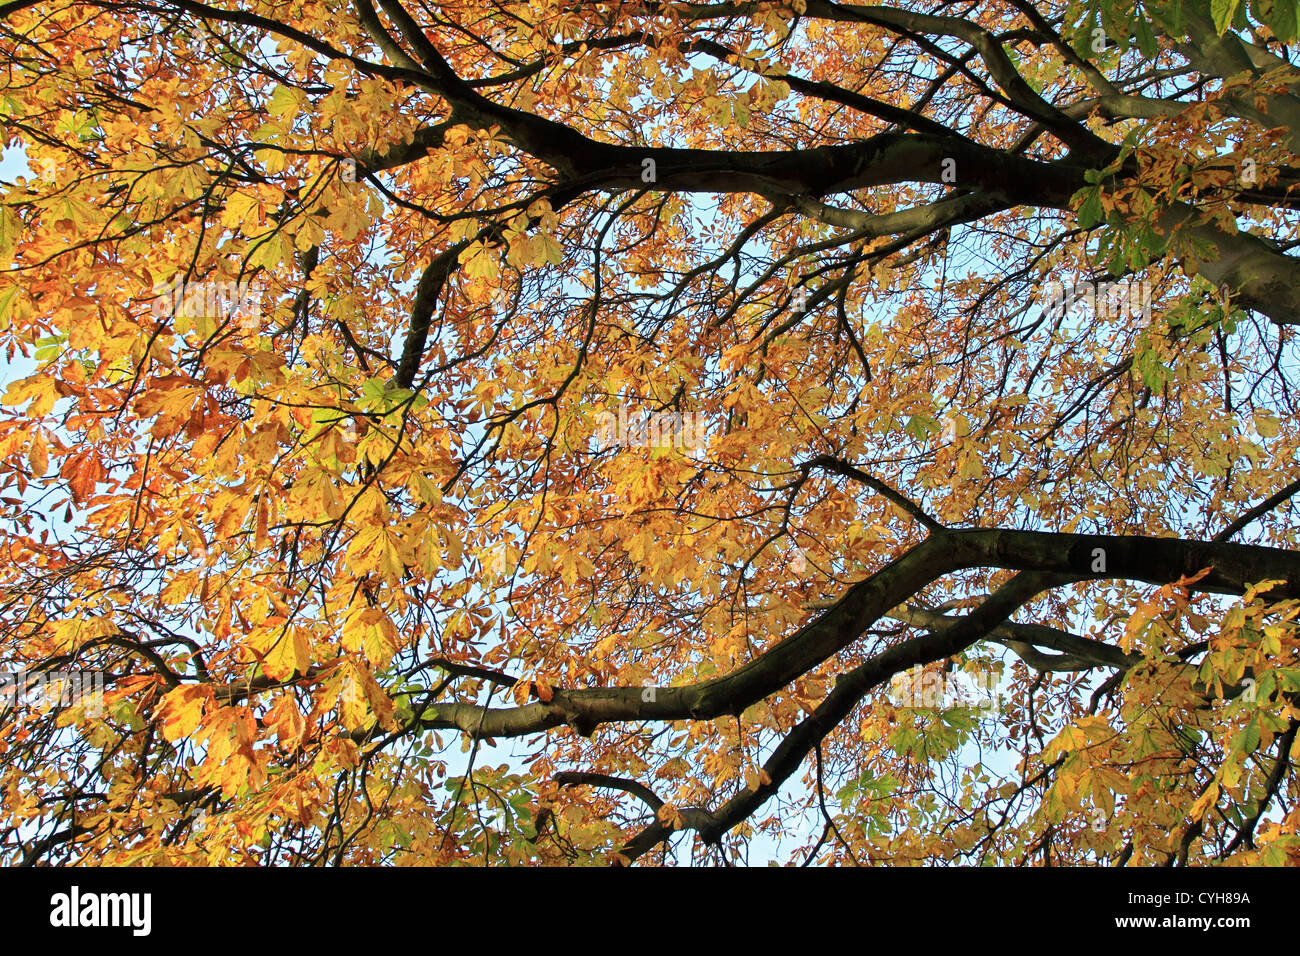 Looking up through the canopy of leaves of tree showing autumn colours in Roundhay Park Leeds, West Yorkshire, England, UK Stock Photo